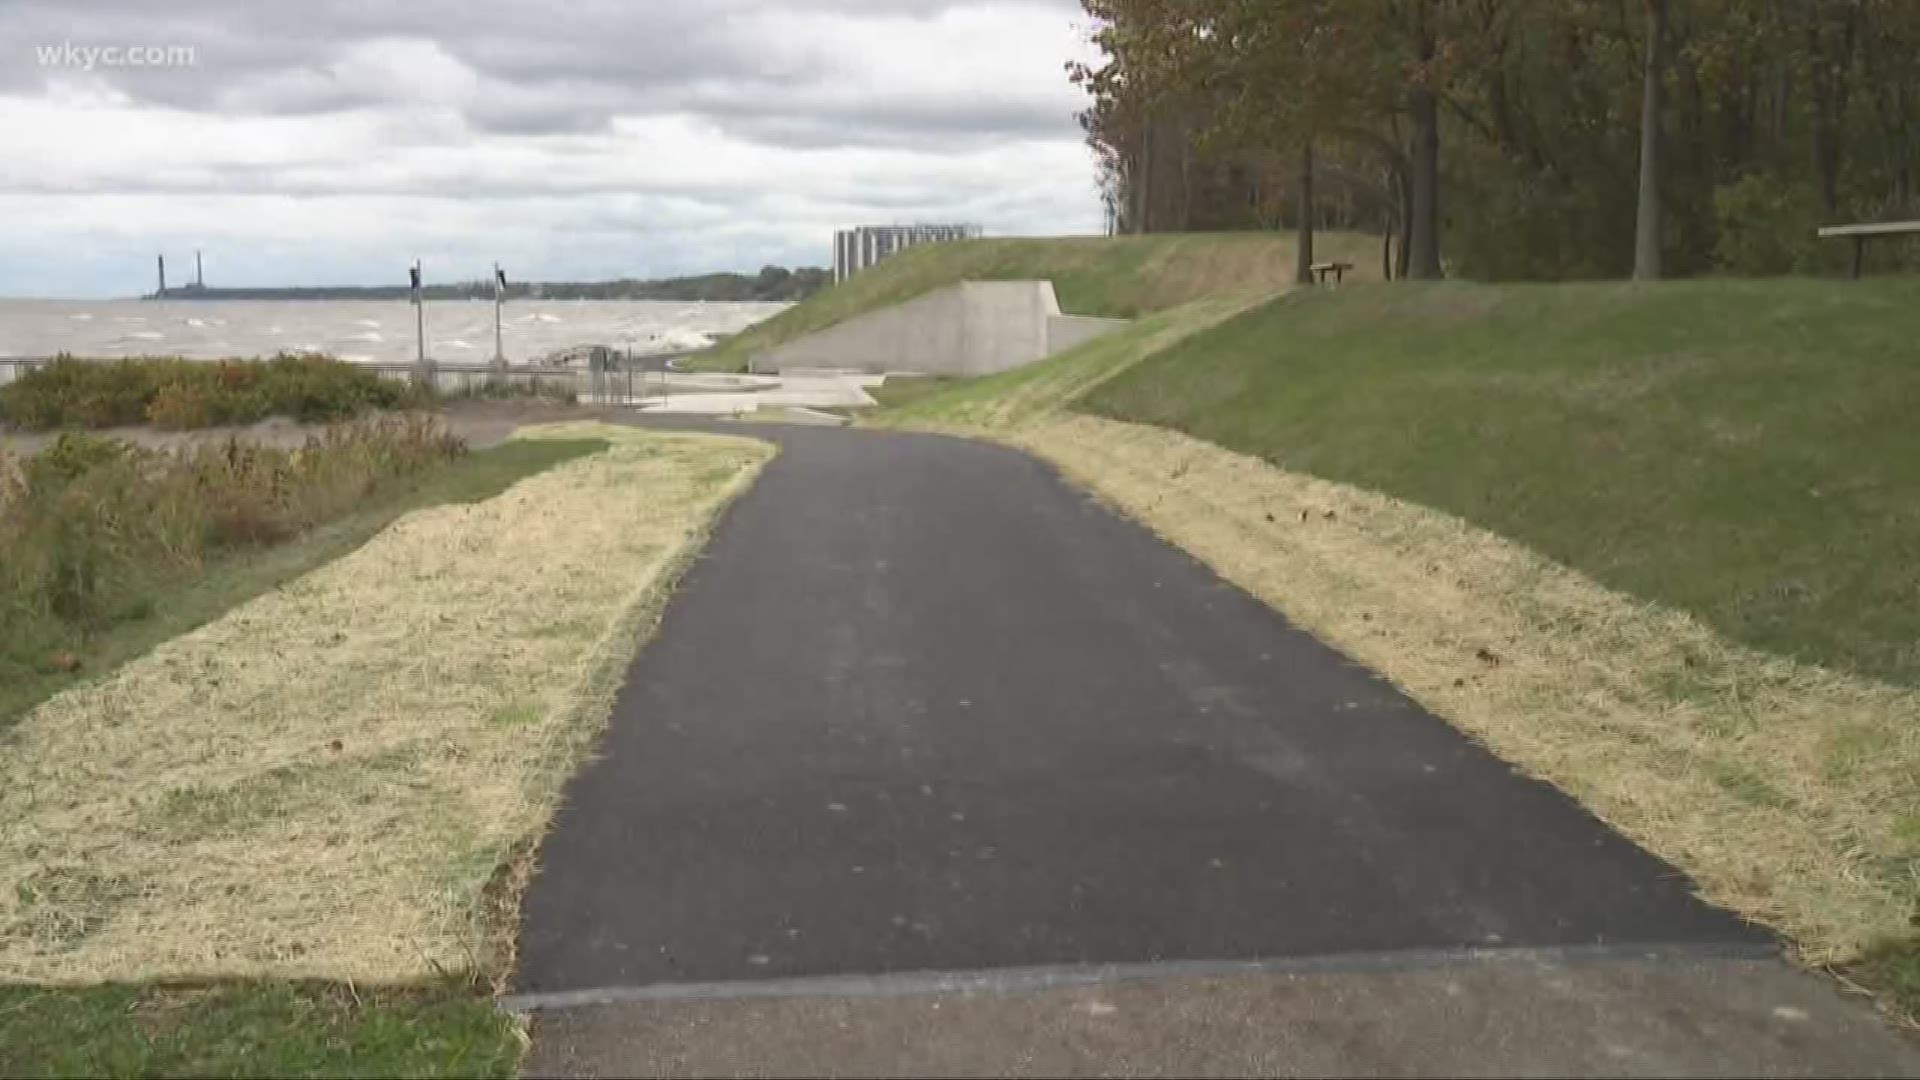 Cuyahoga County Executive Armond Budish and local community leaders will unveil their plan to enhance 30 miles of the county's lakefront.